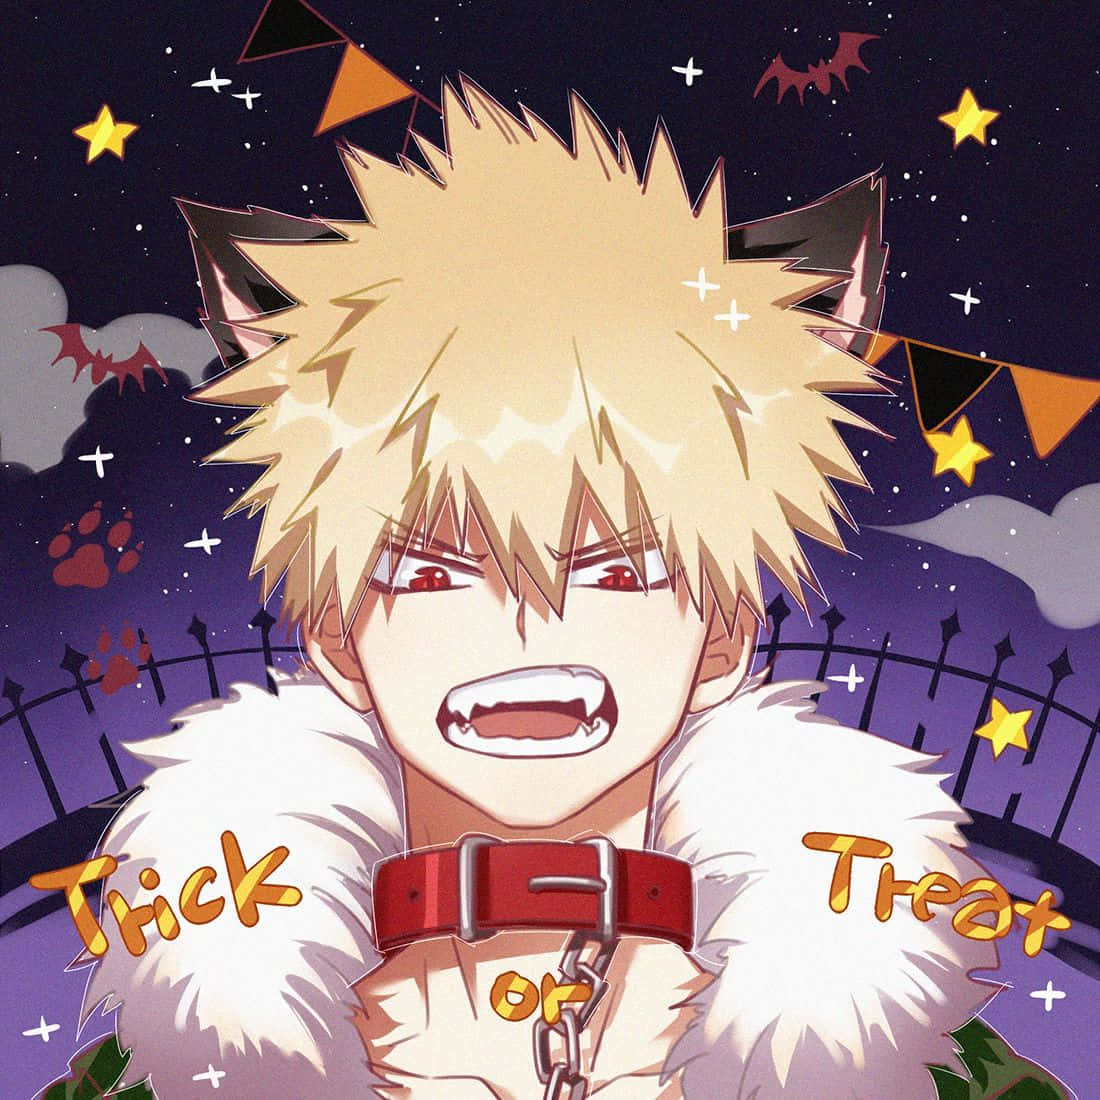 A Close-up Of The Vibrant And Distinct Features Of Bakugou's Face Background